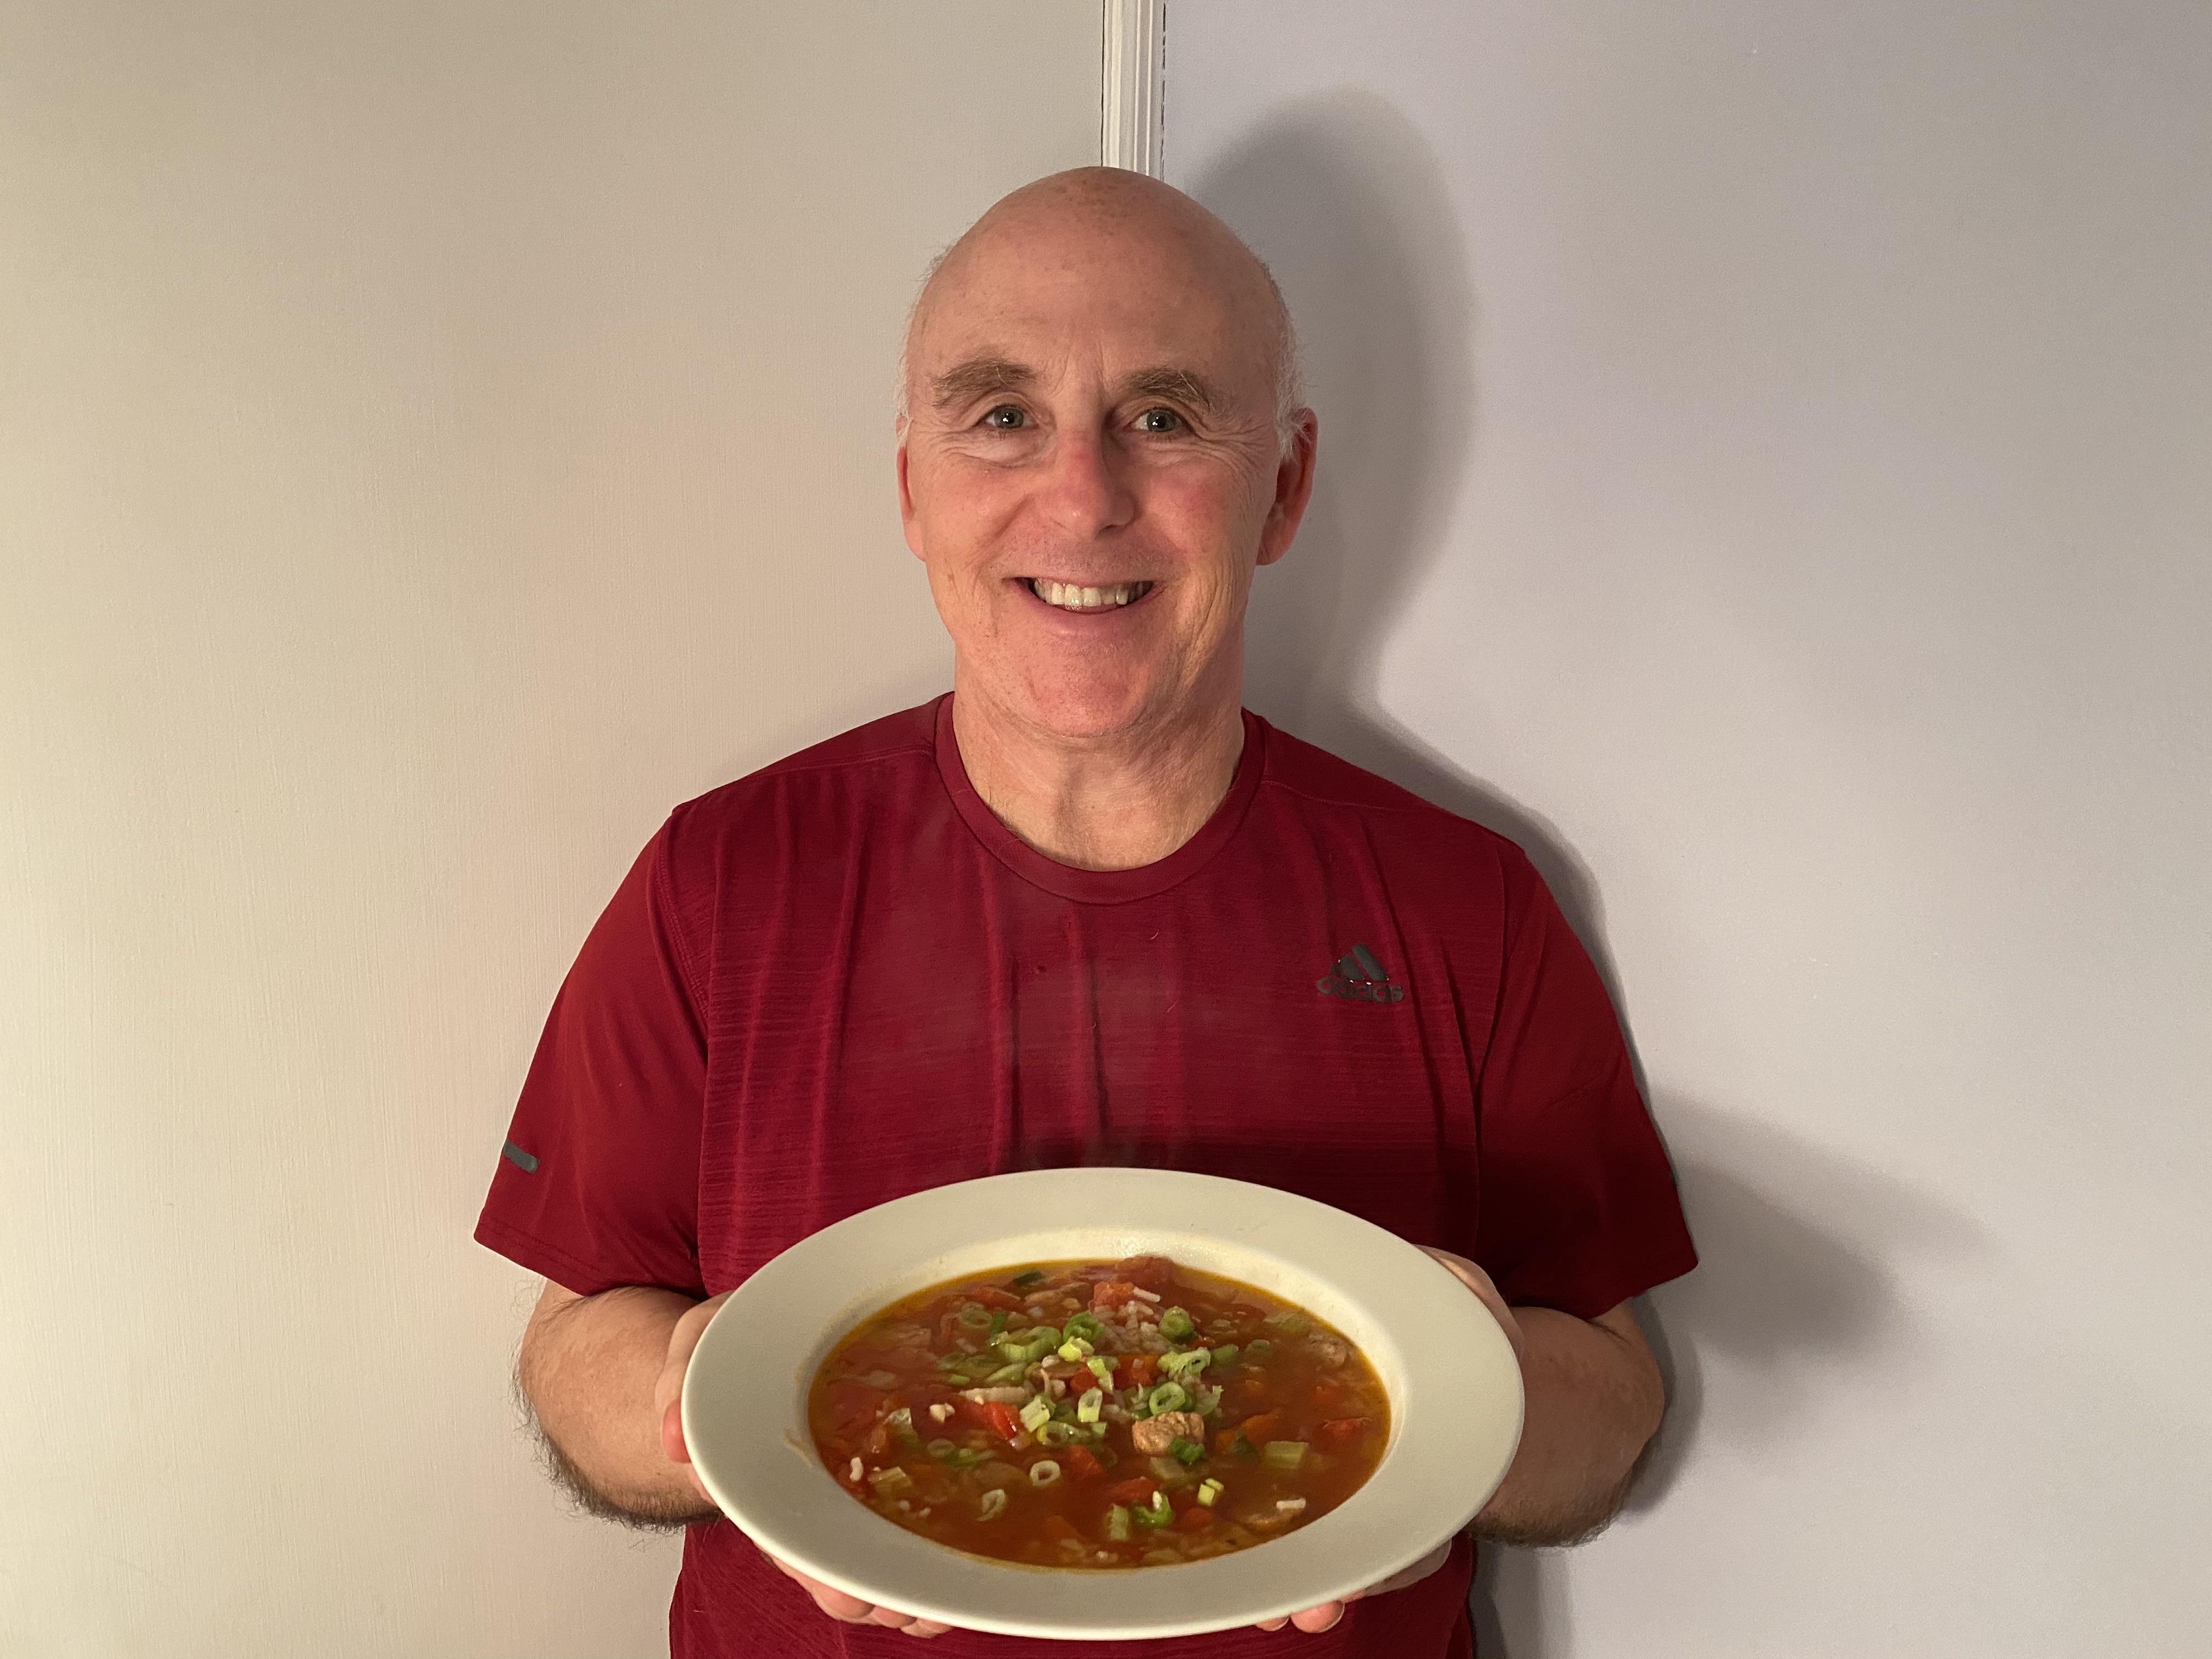 Photo of Chef Rob holding a bowl of Vegetable & Herb Chicken Stew.